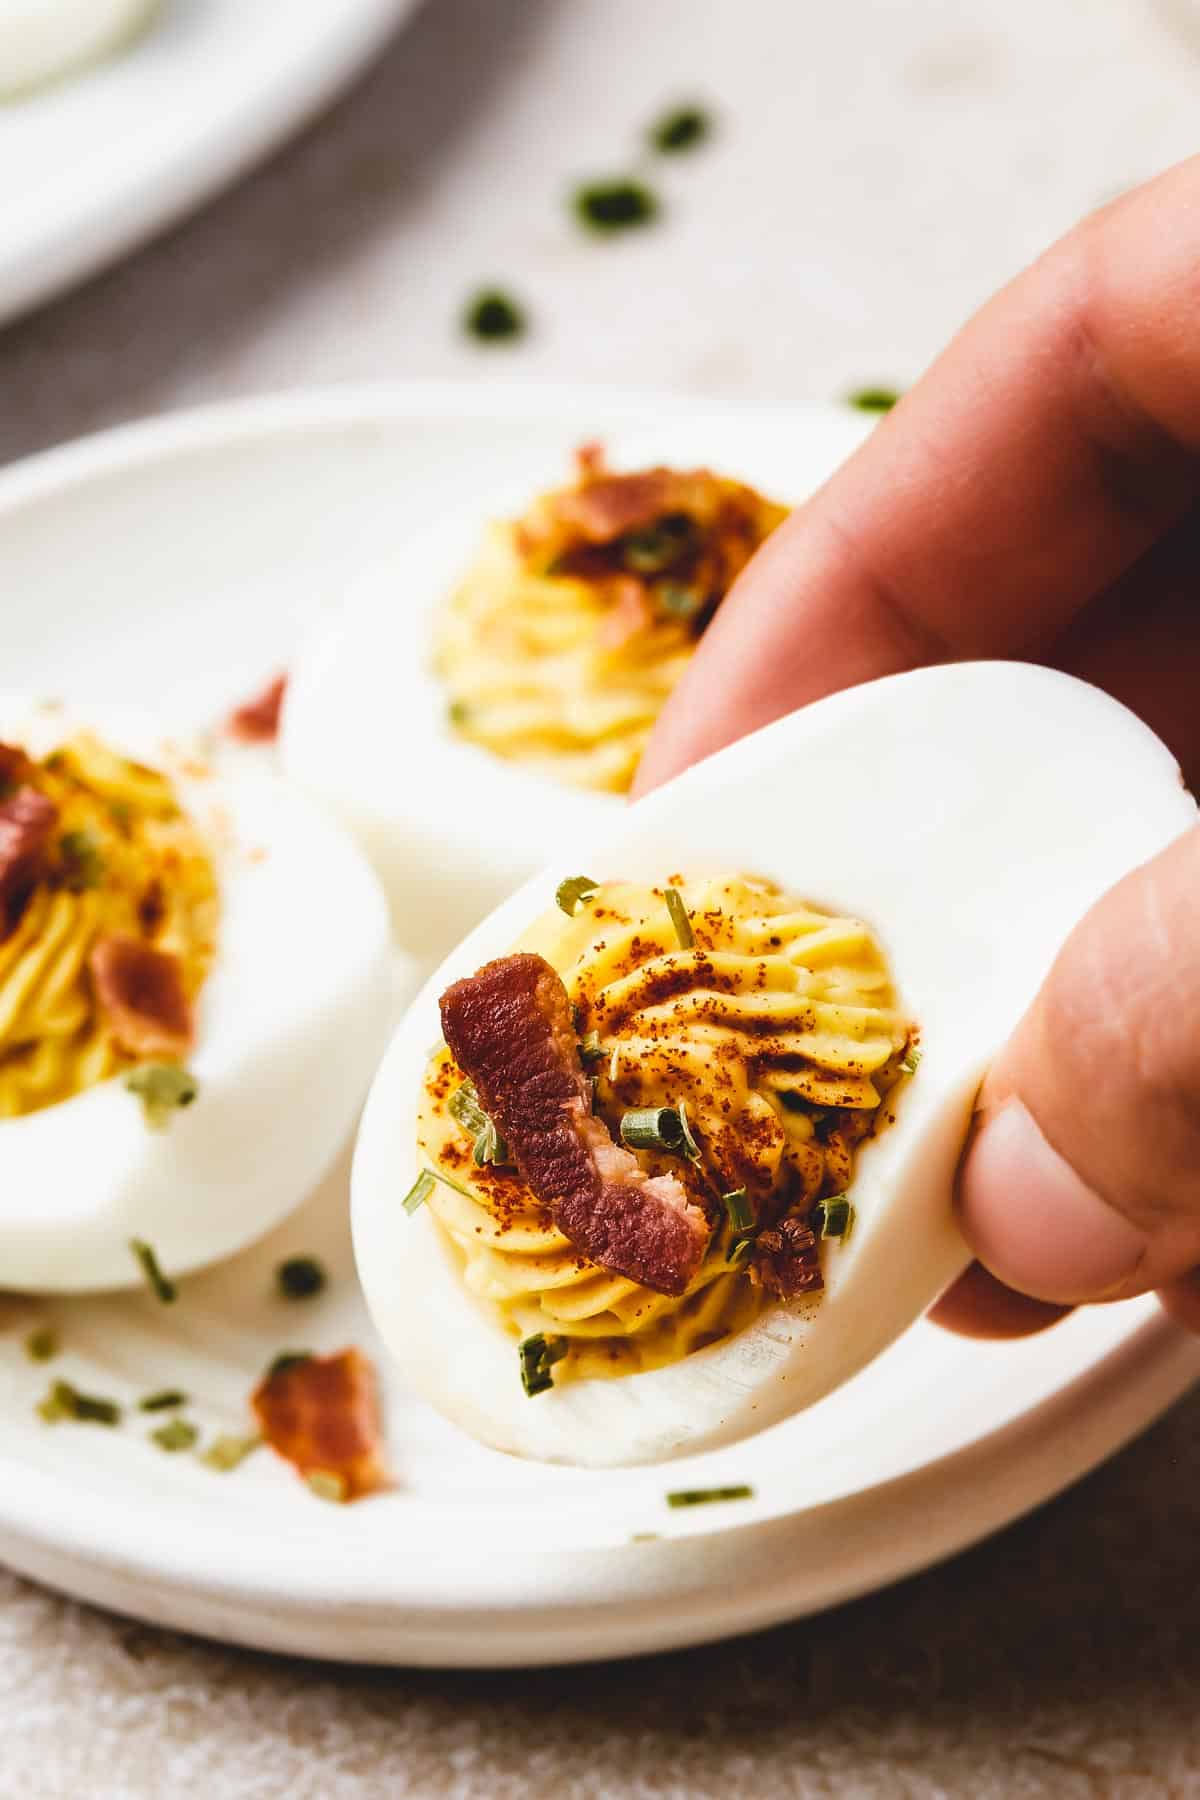 A woman's hand is lifting a deviled egg from a small plate toward the camera.